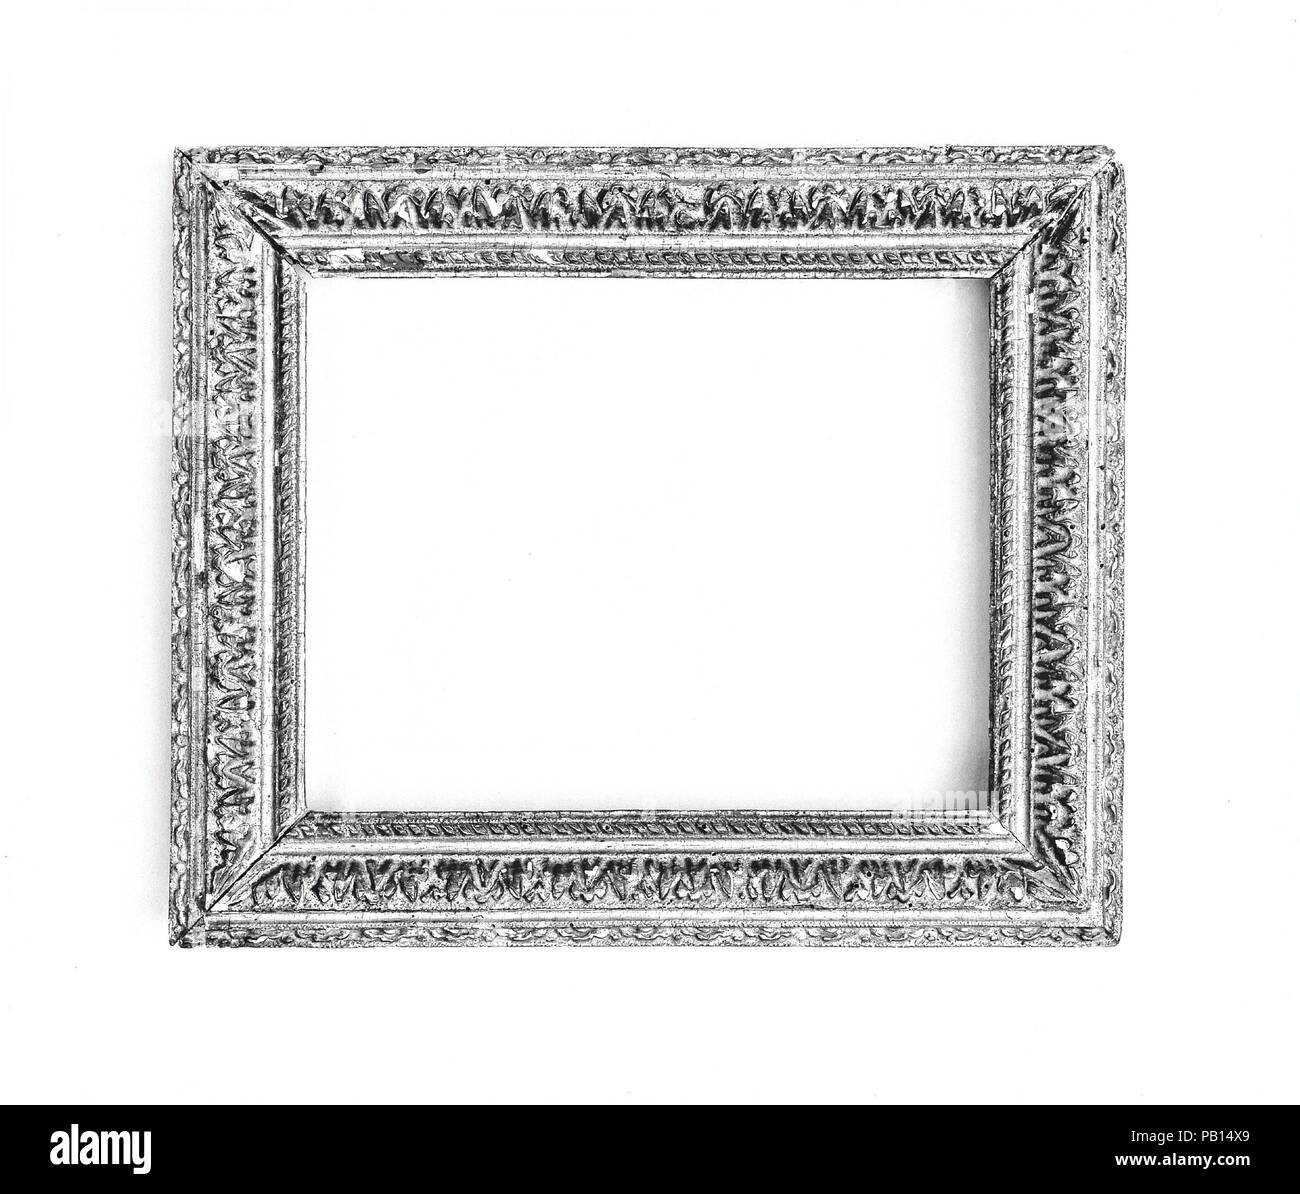 Ovolo frame. Culture: French. Dimensions: 24 x 28.5, 15.7 x 20.3, 17 x 21.5 cm.. Date: 1640-50. Museum: Metropolitan Museum of Art, New York, USA. Stock Photo